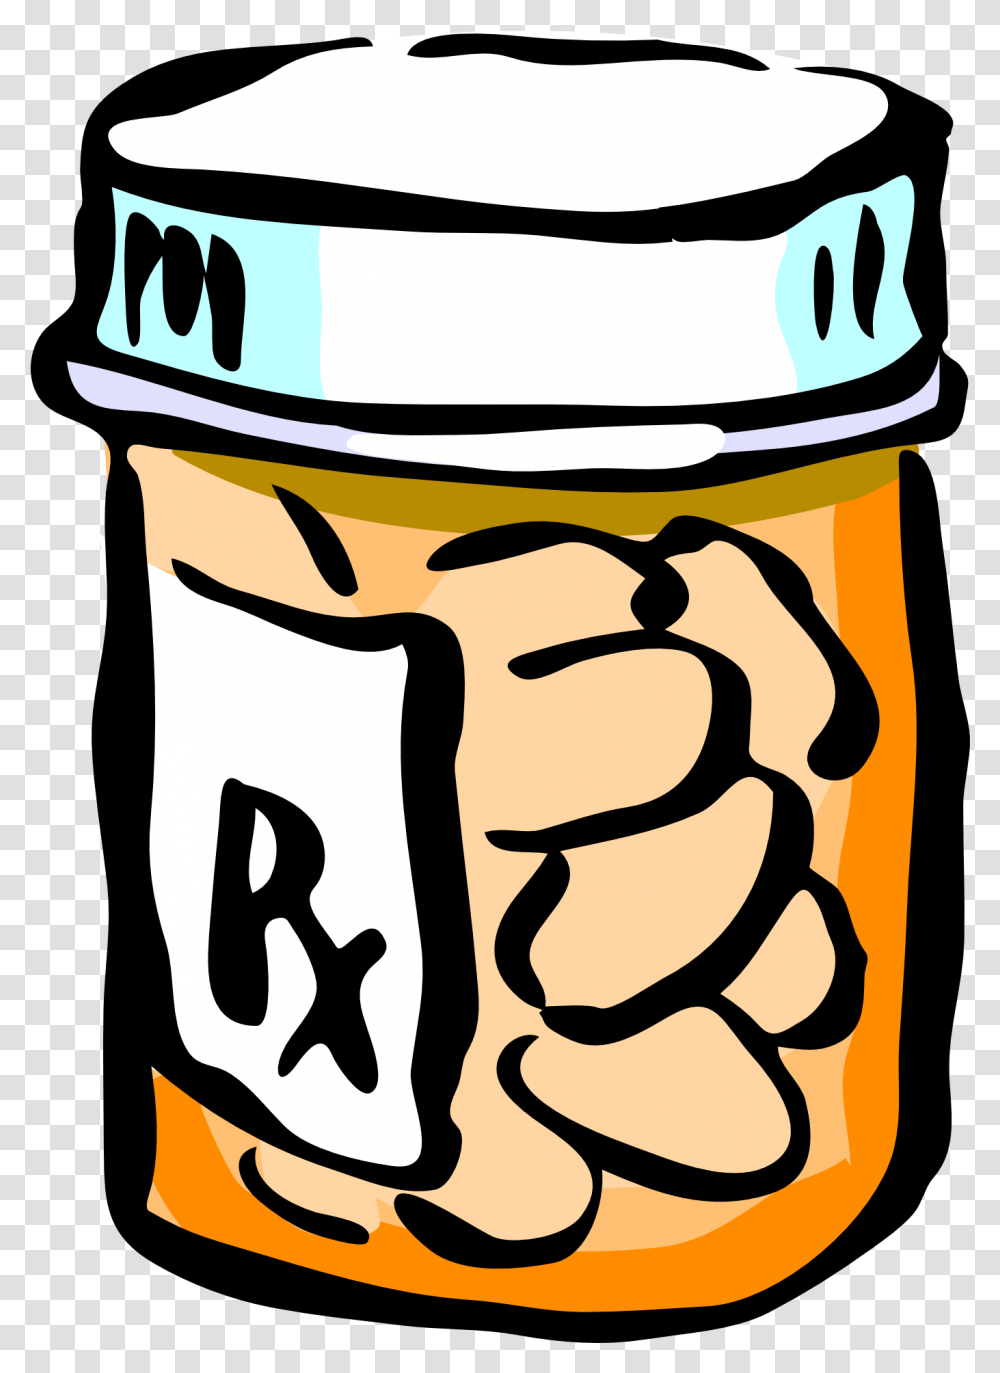 Yellow Pill Container Free Image Background Pill Bottle Clipart, Jar, Food Transparent Png